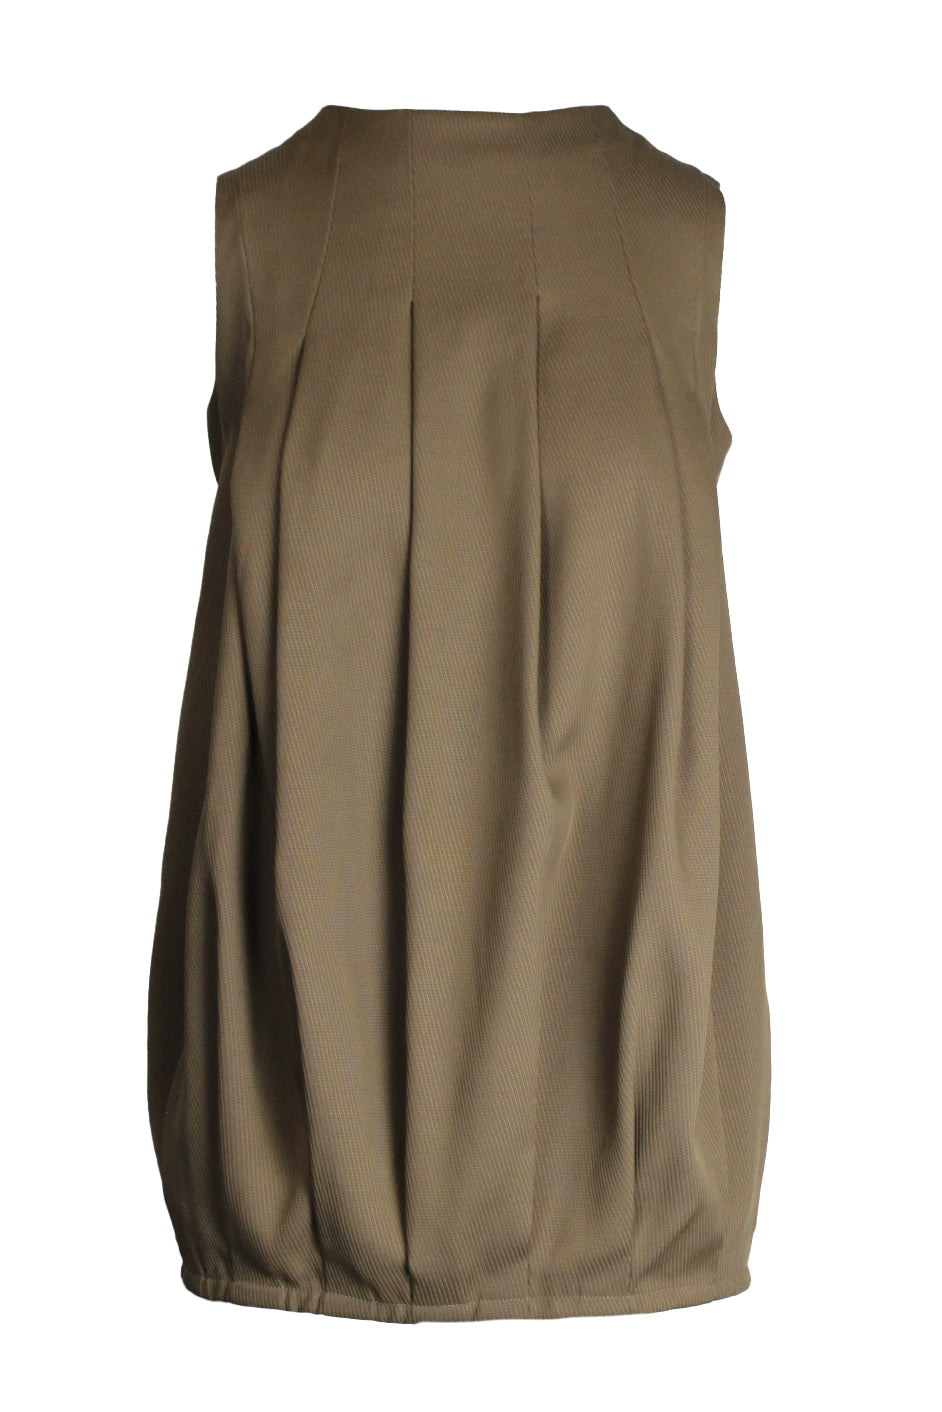 description: marni green olive sleeveless long top. features rounded neckline, pleated design throughout, black zipper closure at center back, and balloon loose fit. 